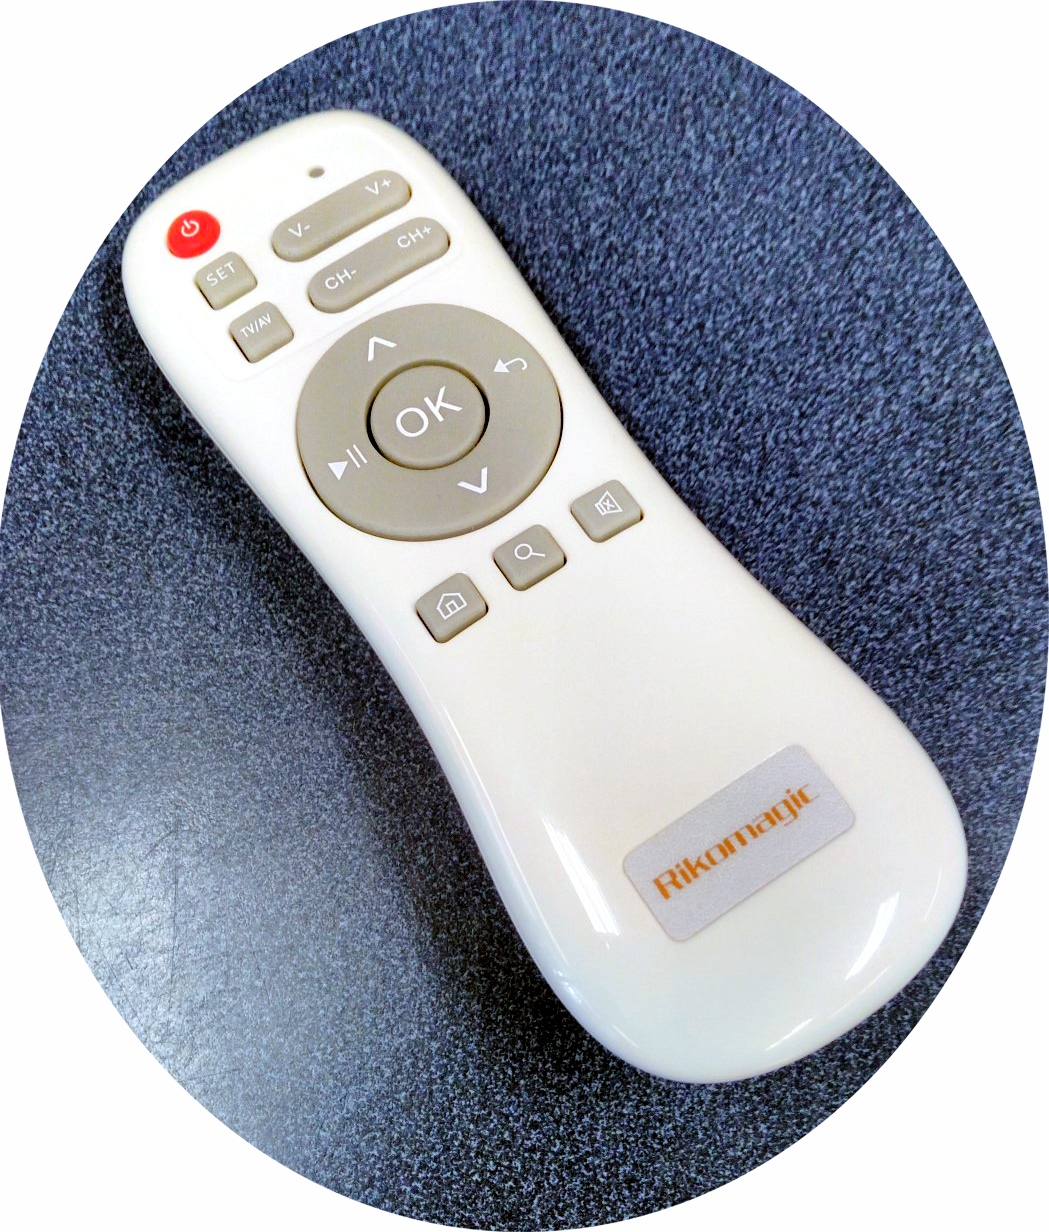 Rikomagic MK702 Fly Wireless Mouse and remote for Android. USB Dongle, with IR remote learning function